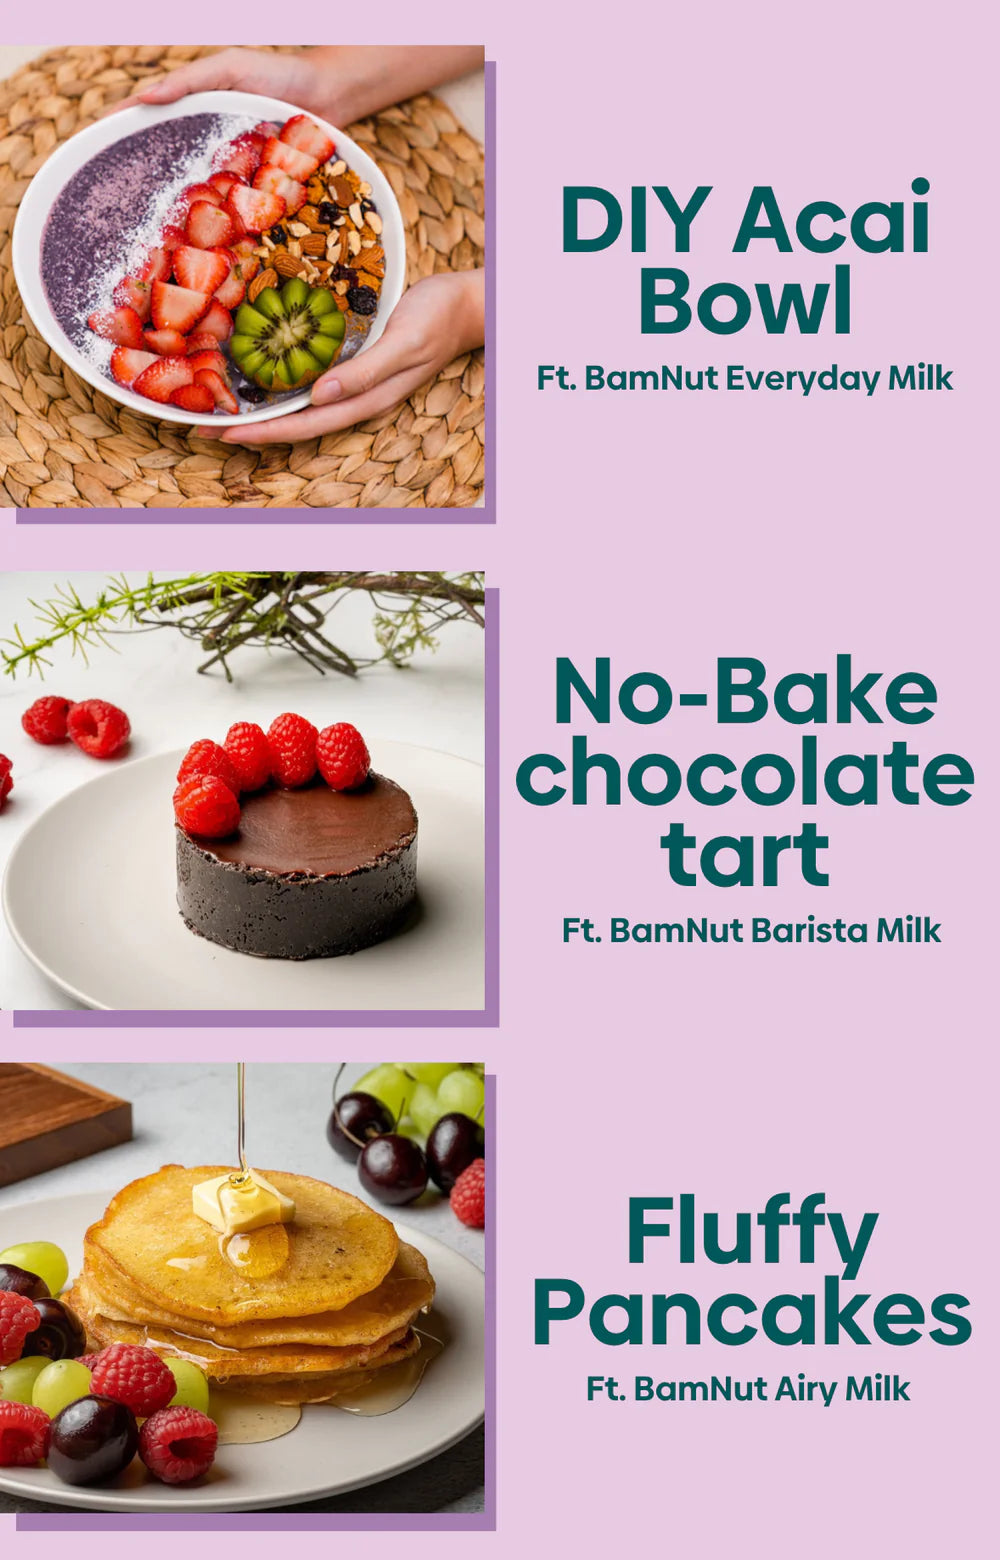 The proof is in the pudding – Amazing desserts you can make with BAMnut milk!